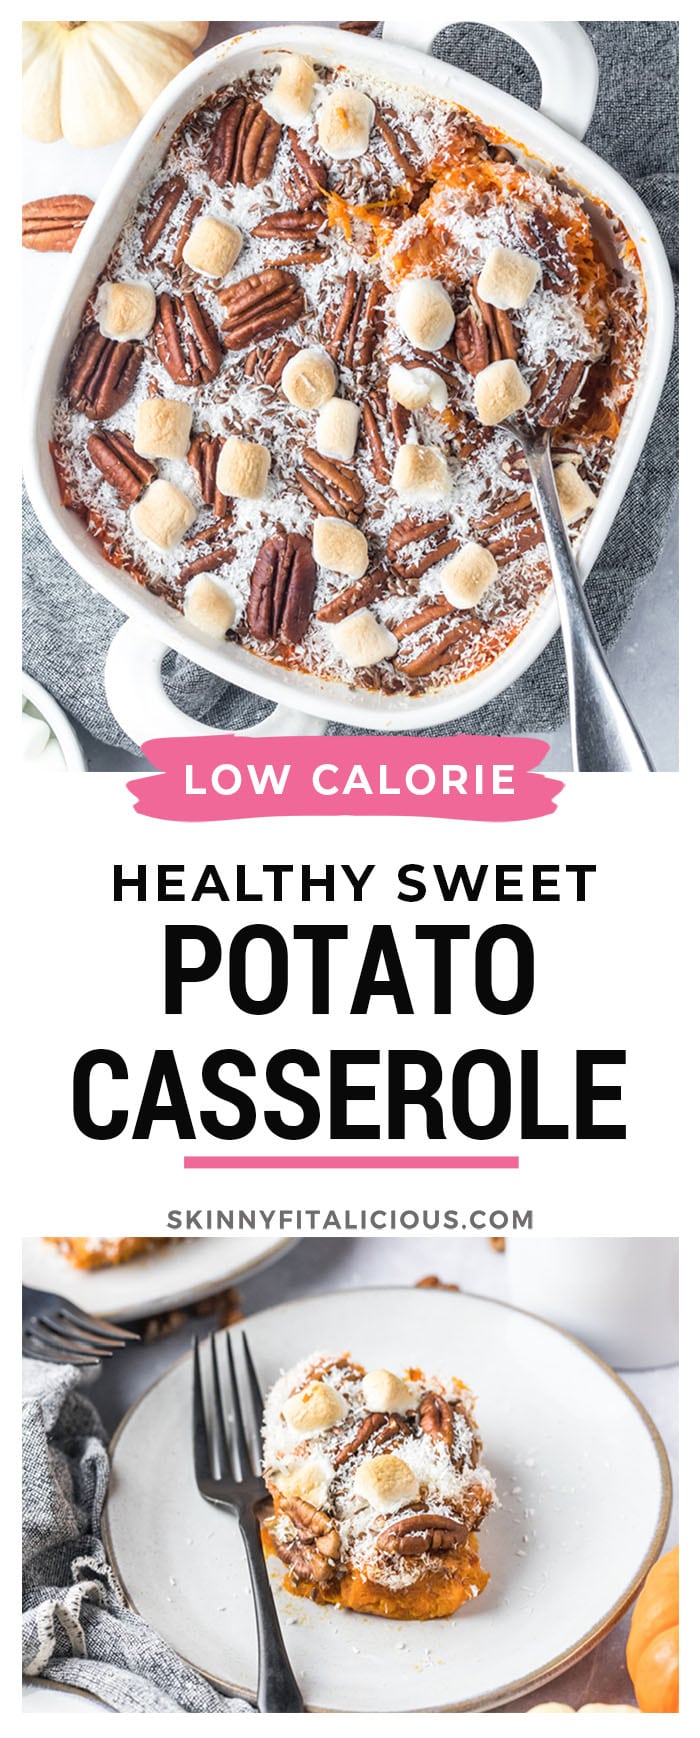 Healthy Sweet Potato Casserole is a low calorie, gluten free and Paleo dish that's made dairy free and with less added sugar.